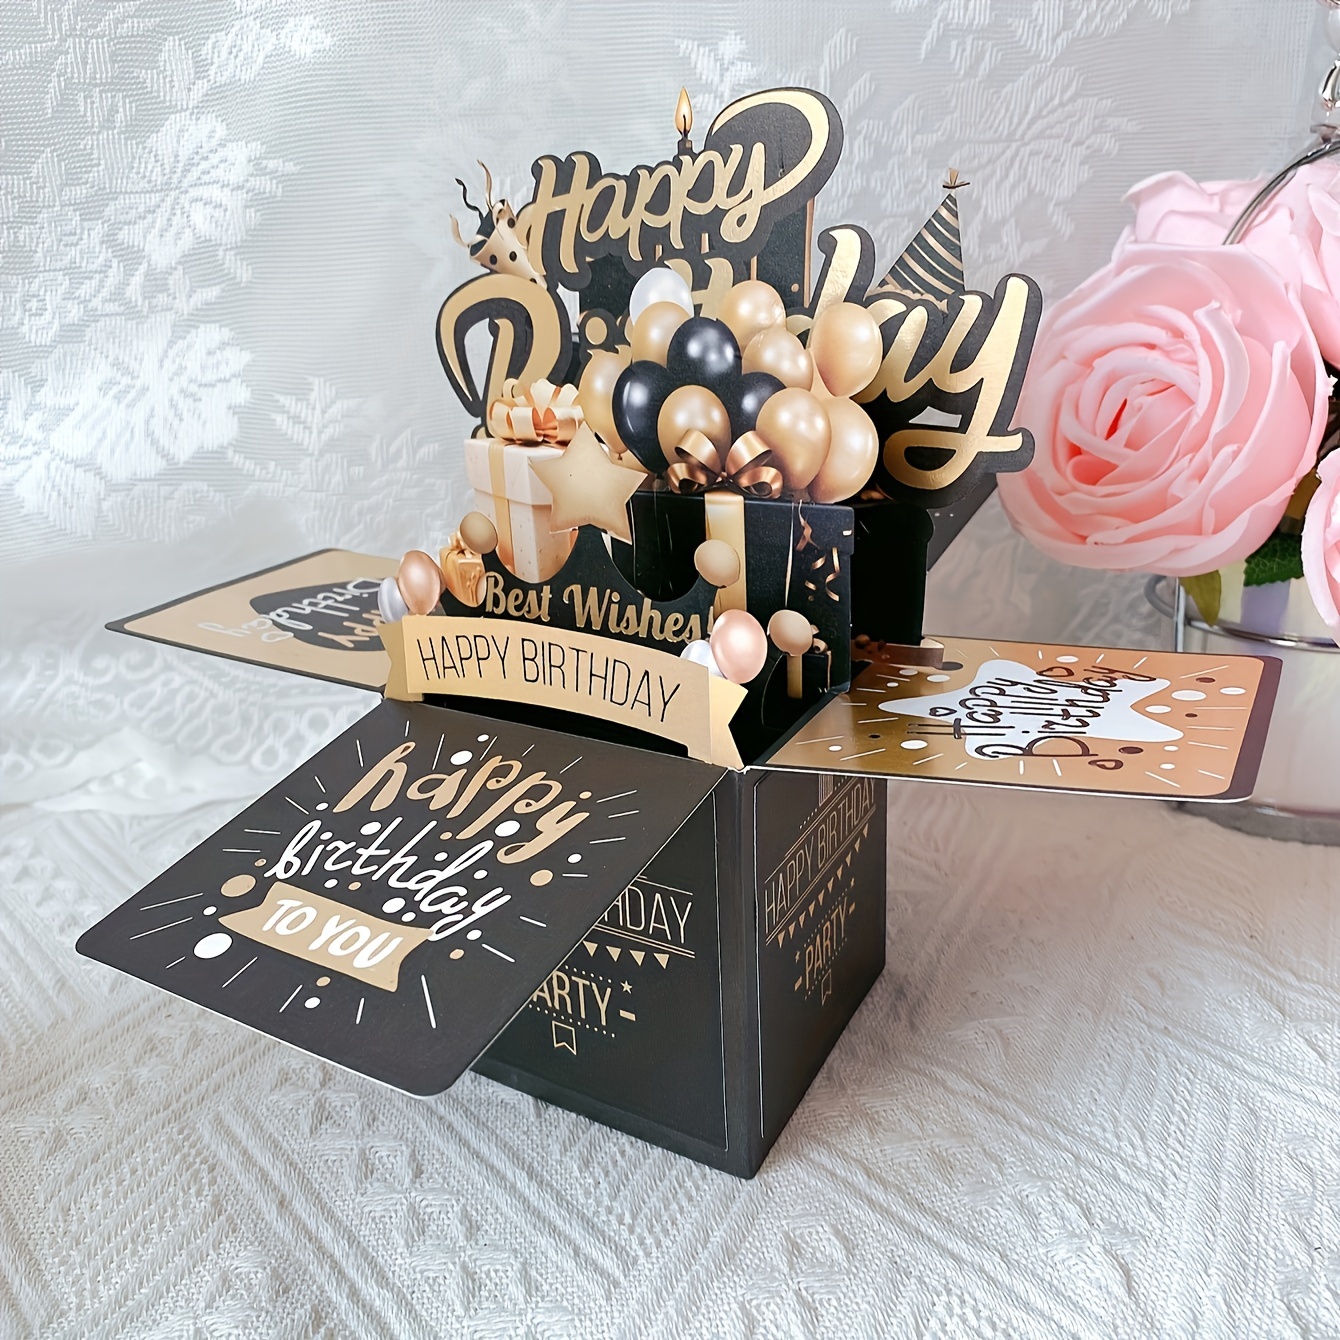 

Happy Birthday Pop-up Card Set: Black And Gold 3d Birthday Greeting Cards For Him Or Her - Perfect For Men, Women, Or Couples - Party Decorations And Handmade Paper Art